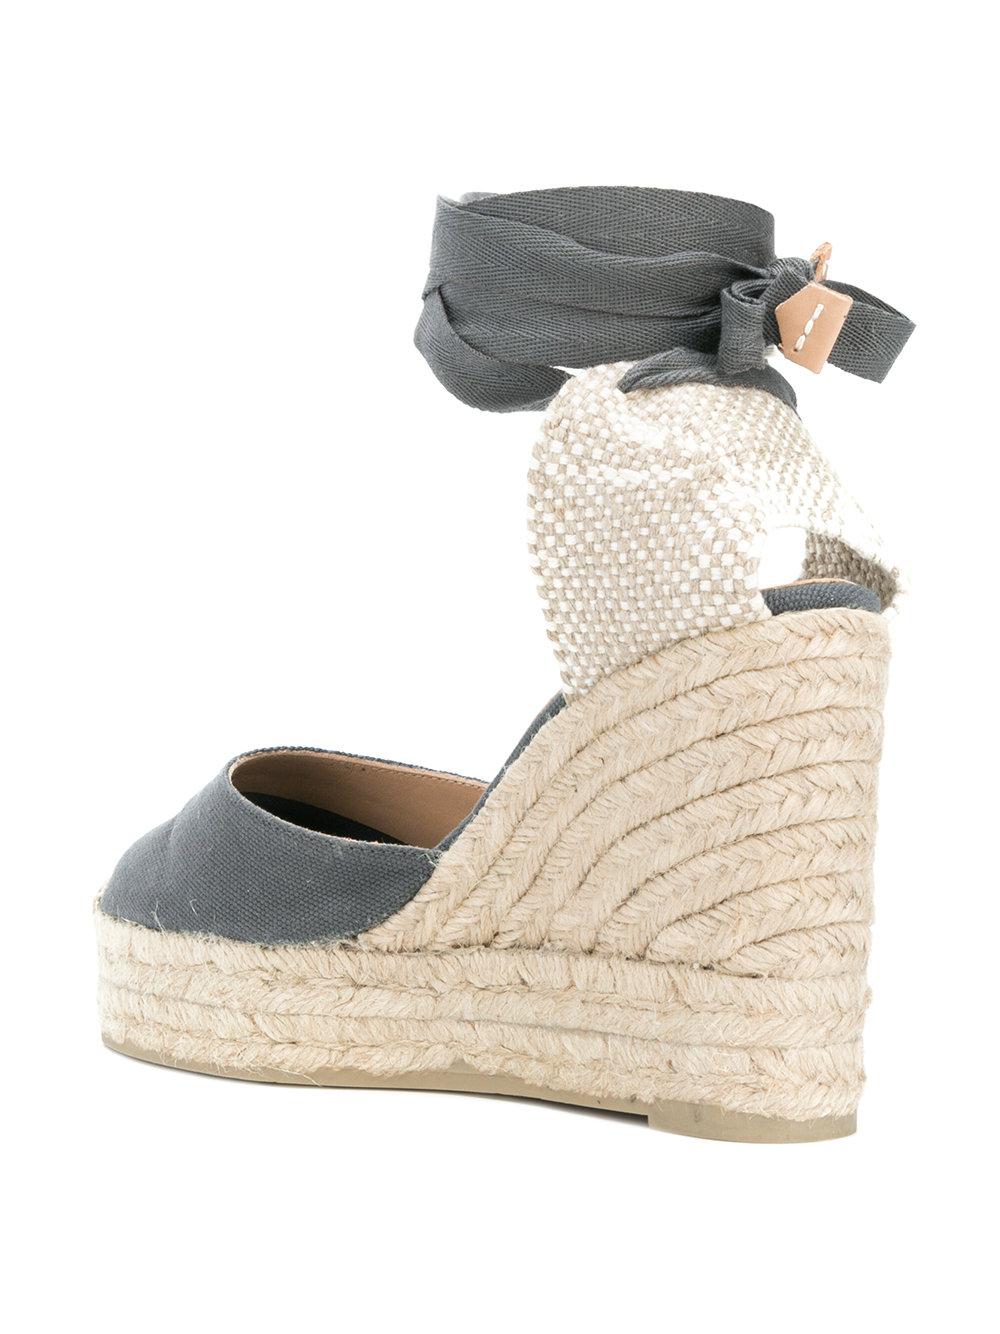 Castaner Strappy Wedge Espadrilles in Gray - Lyst